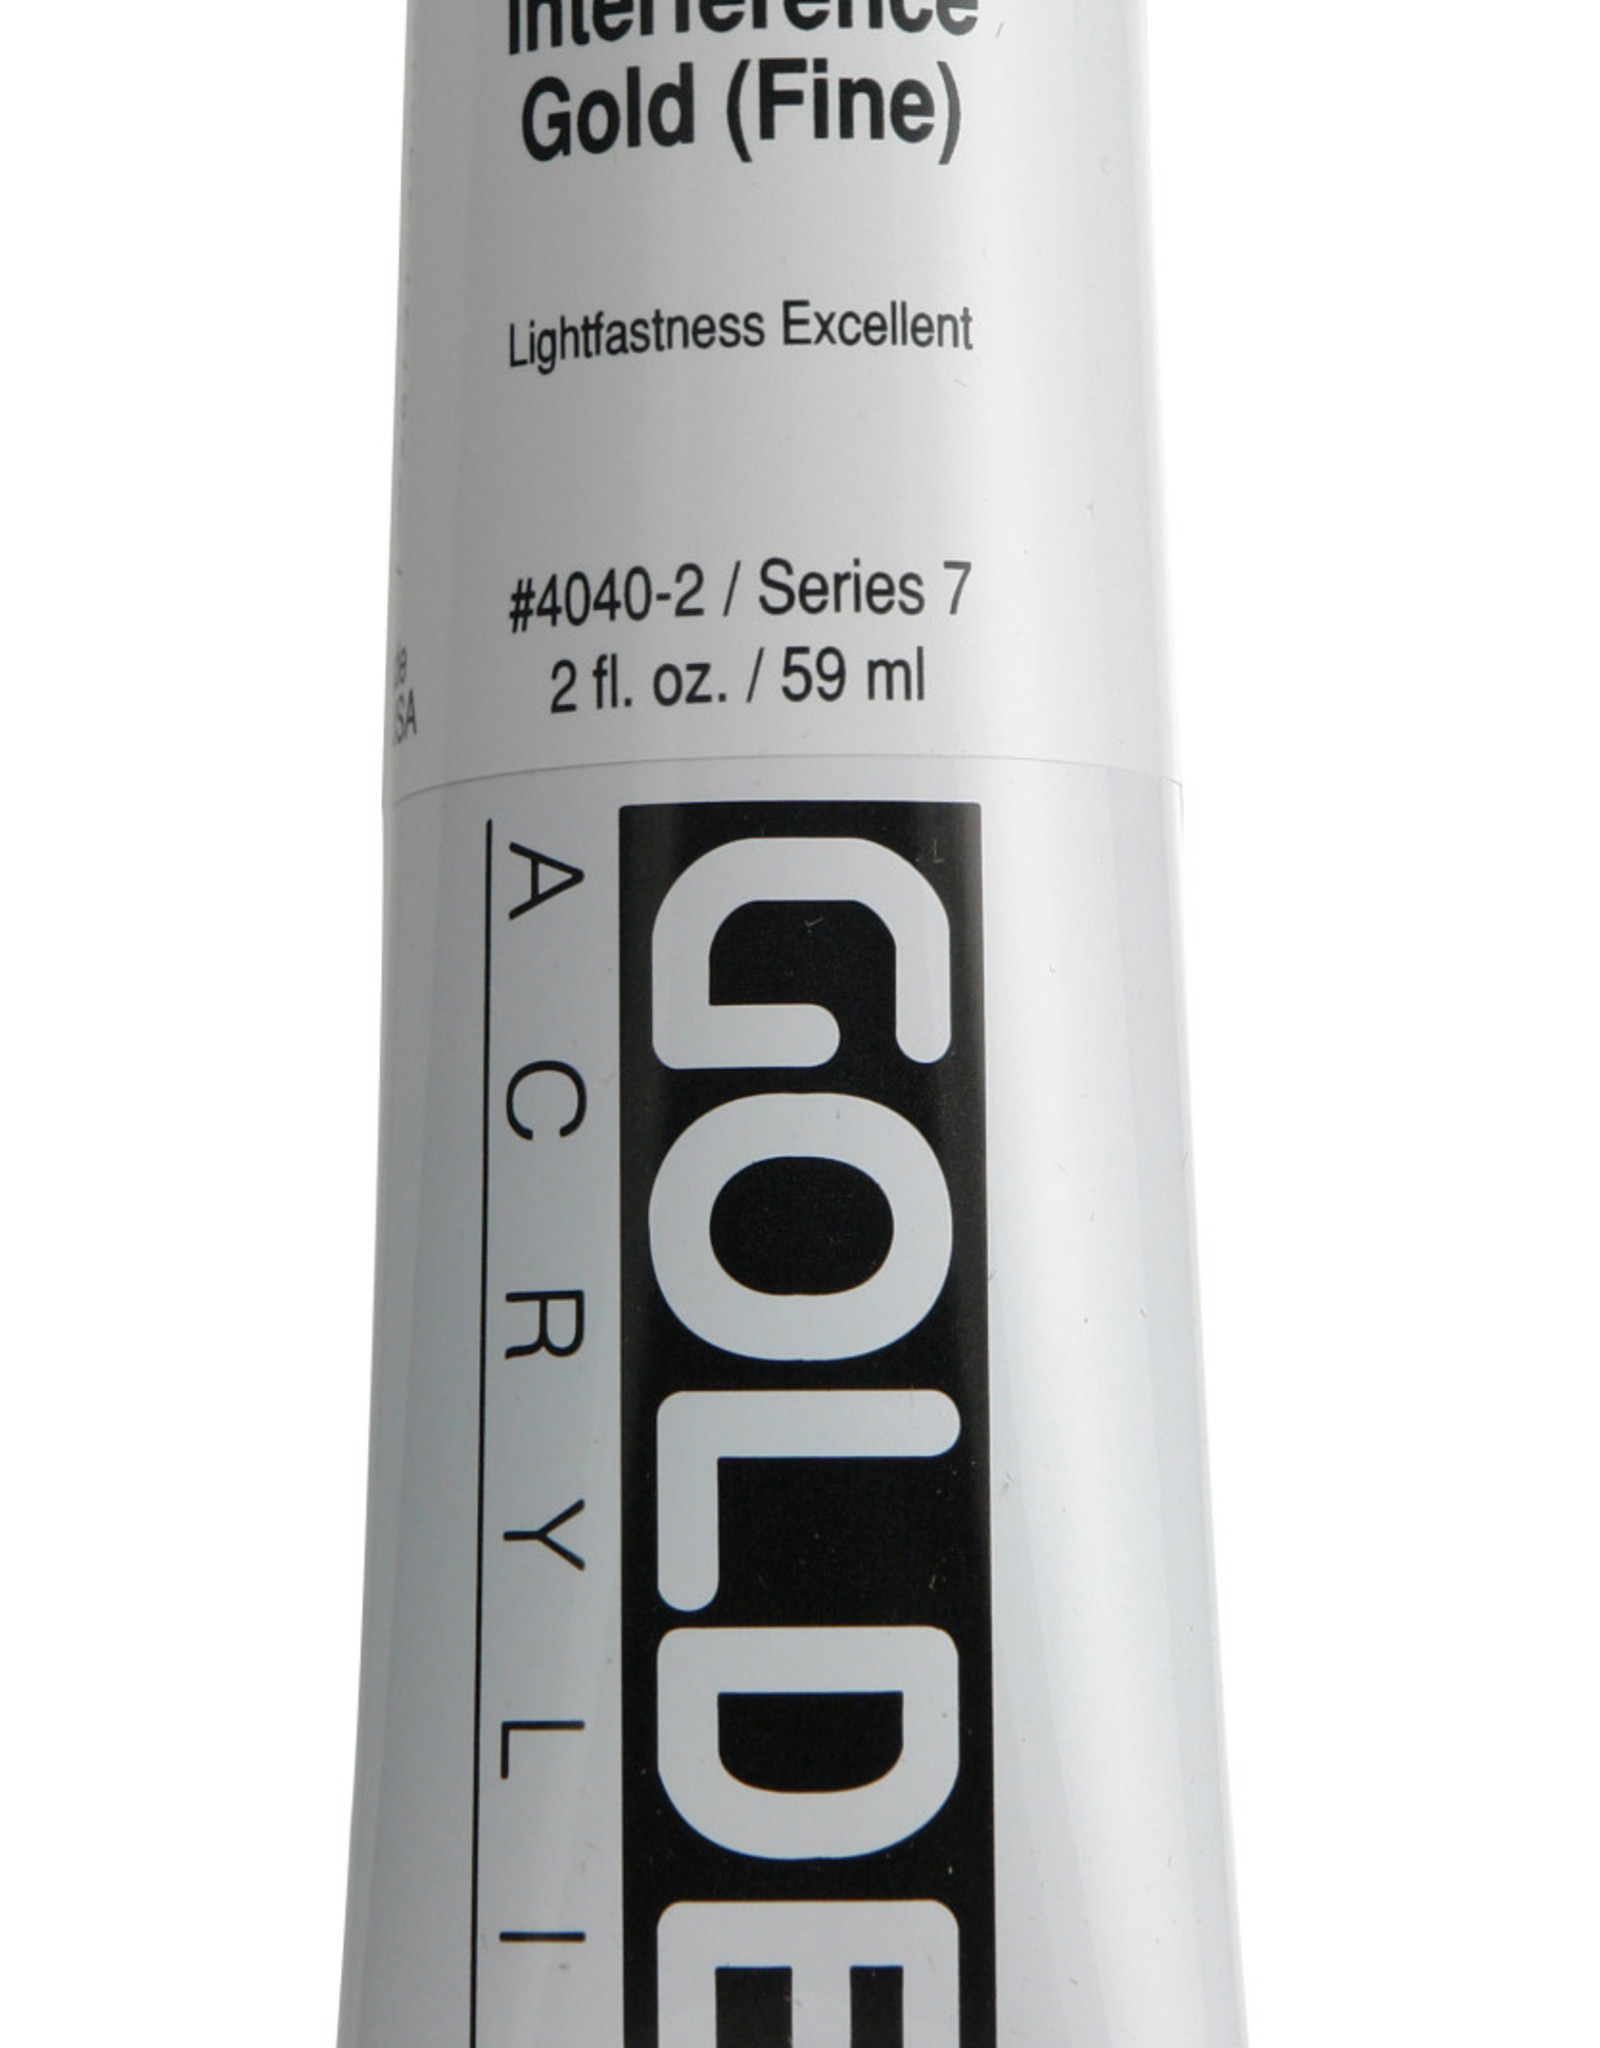 Golden, Heavy Body Acrylic Paint, Interference Gold, Series 7, Tube, 2fl.oz.